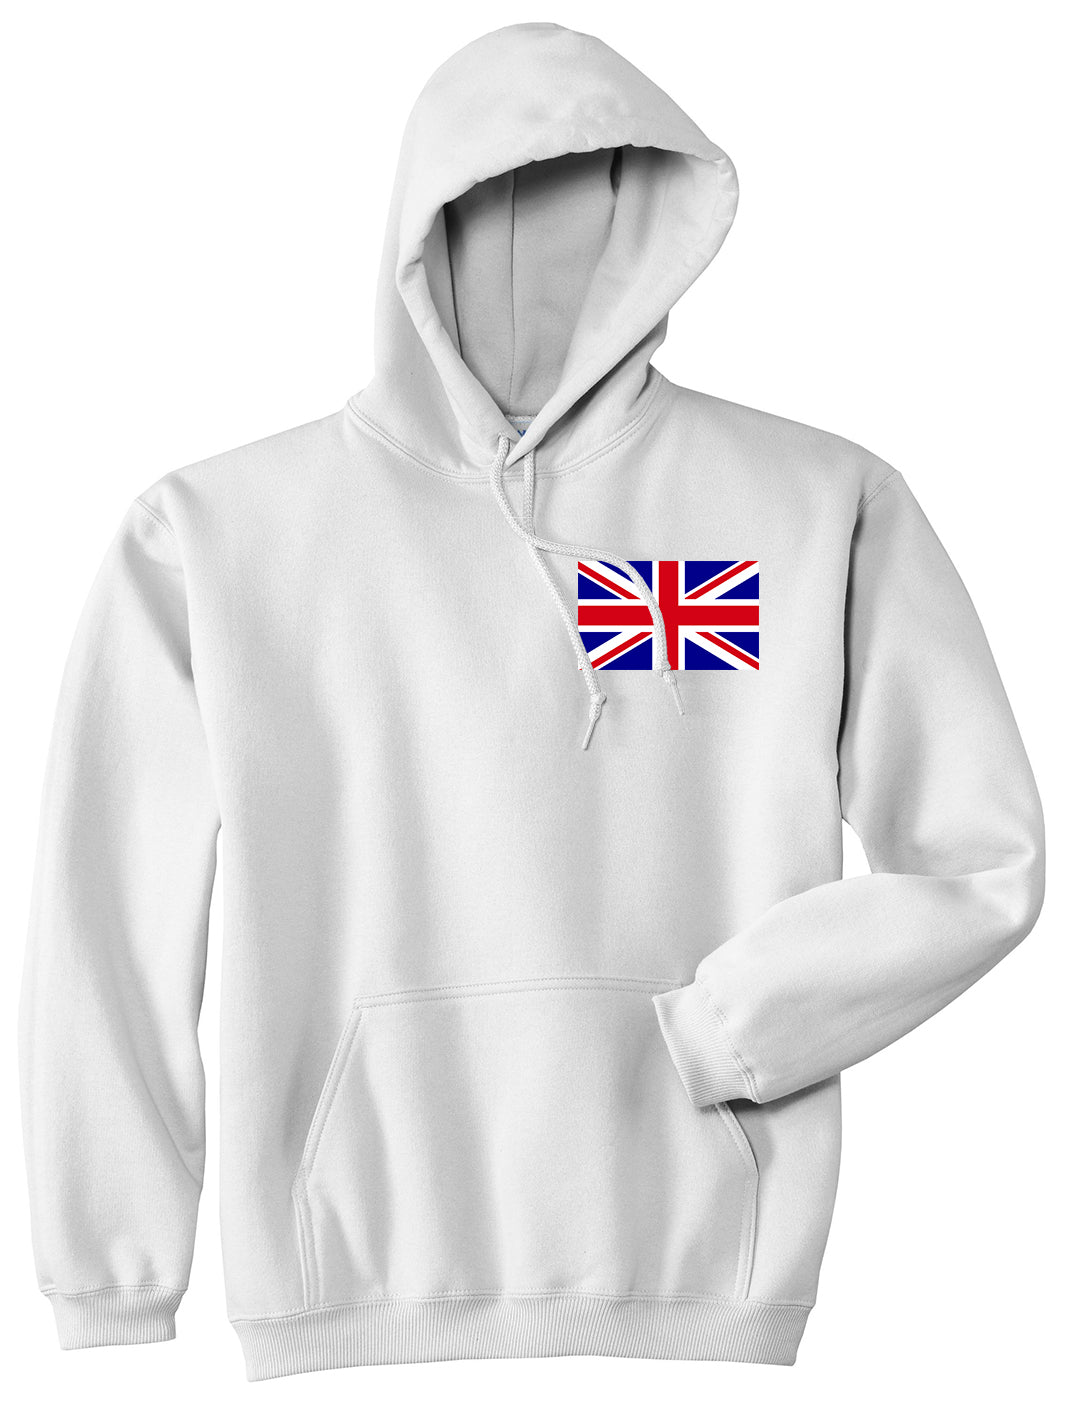 English England Flag Chest Mens White Pullover Hoodie by KINGS OF NY